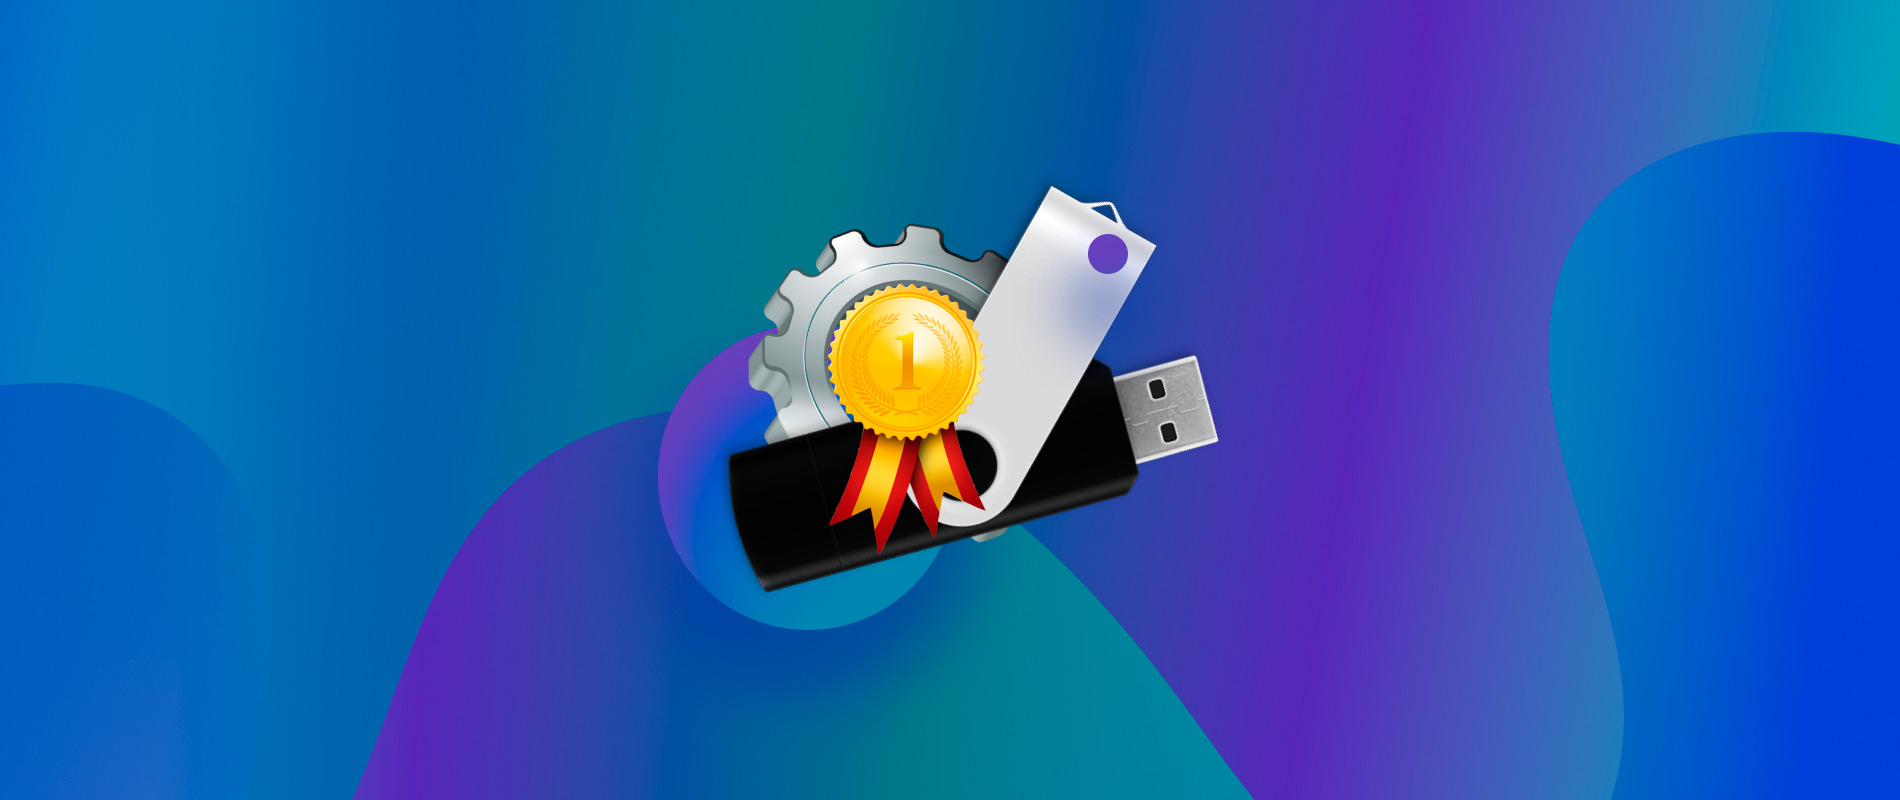 Top USB Recovery Software Choices in 2023 (That Work!)